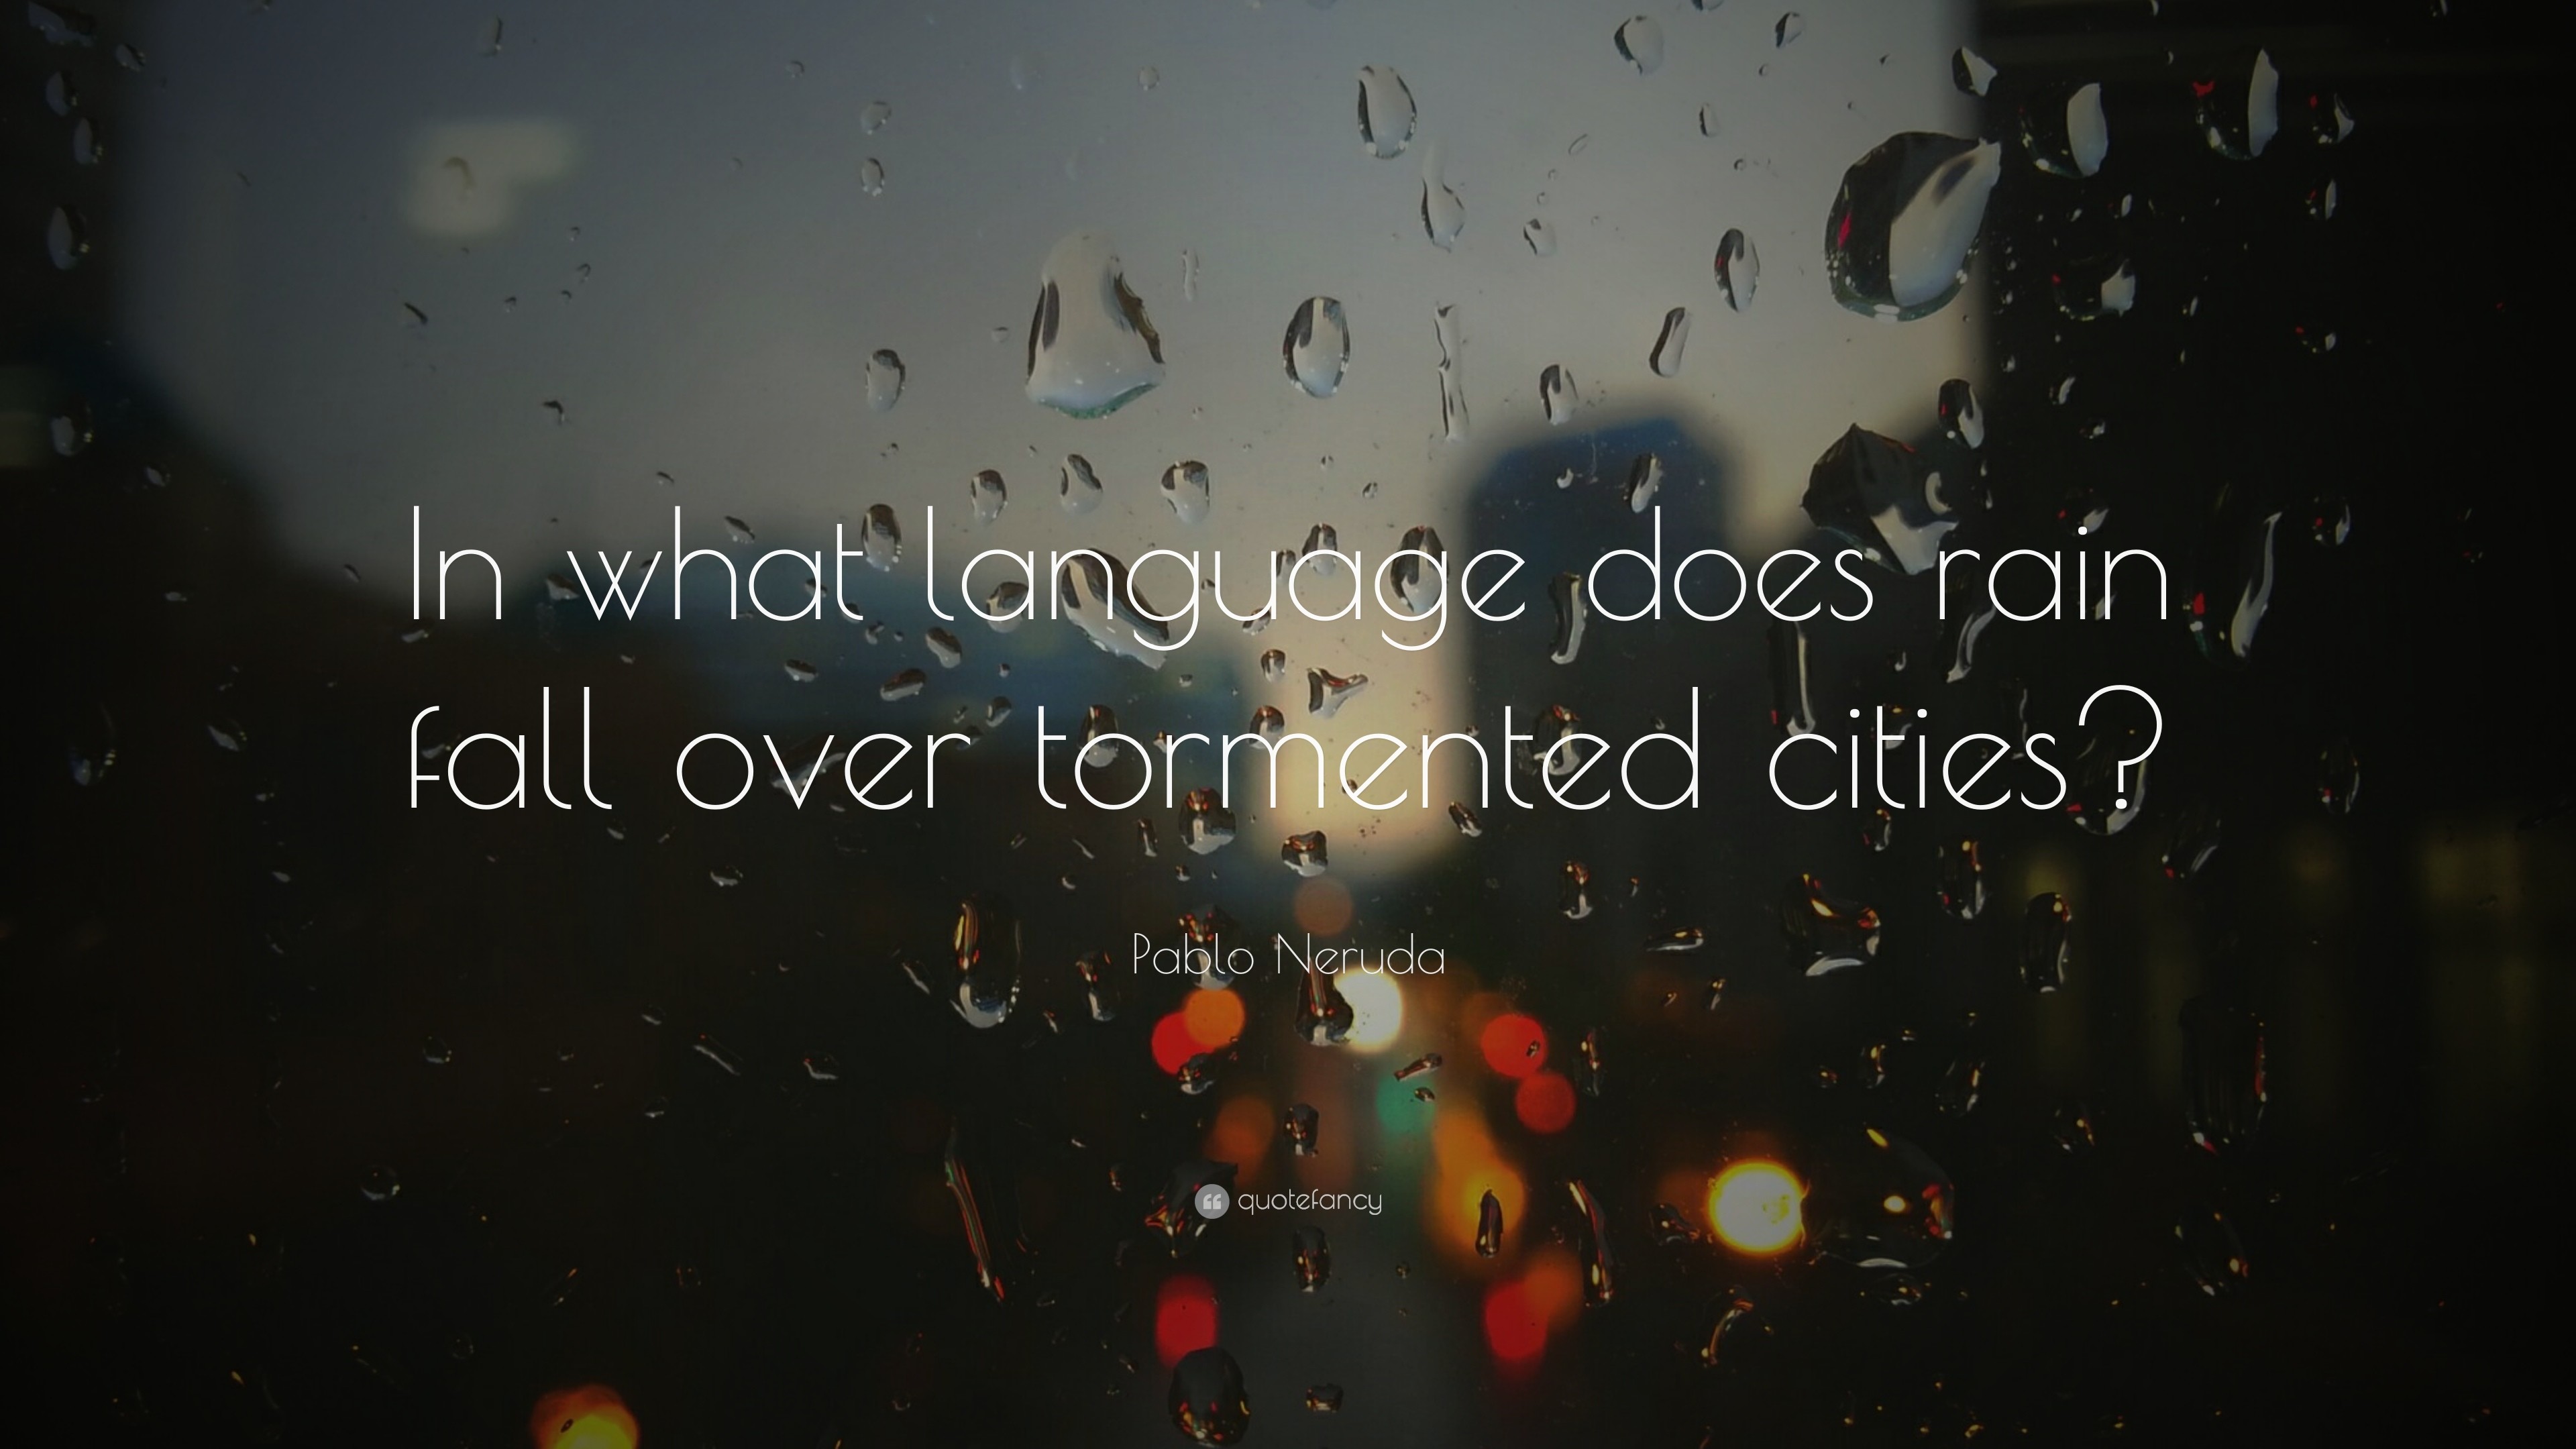 3840x2160 Pablo Neruda Quote: “In what language does rain fall over tormented cities?”